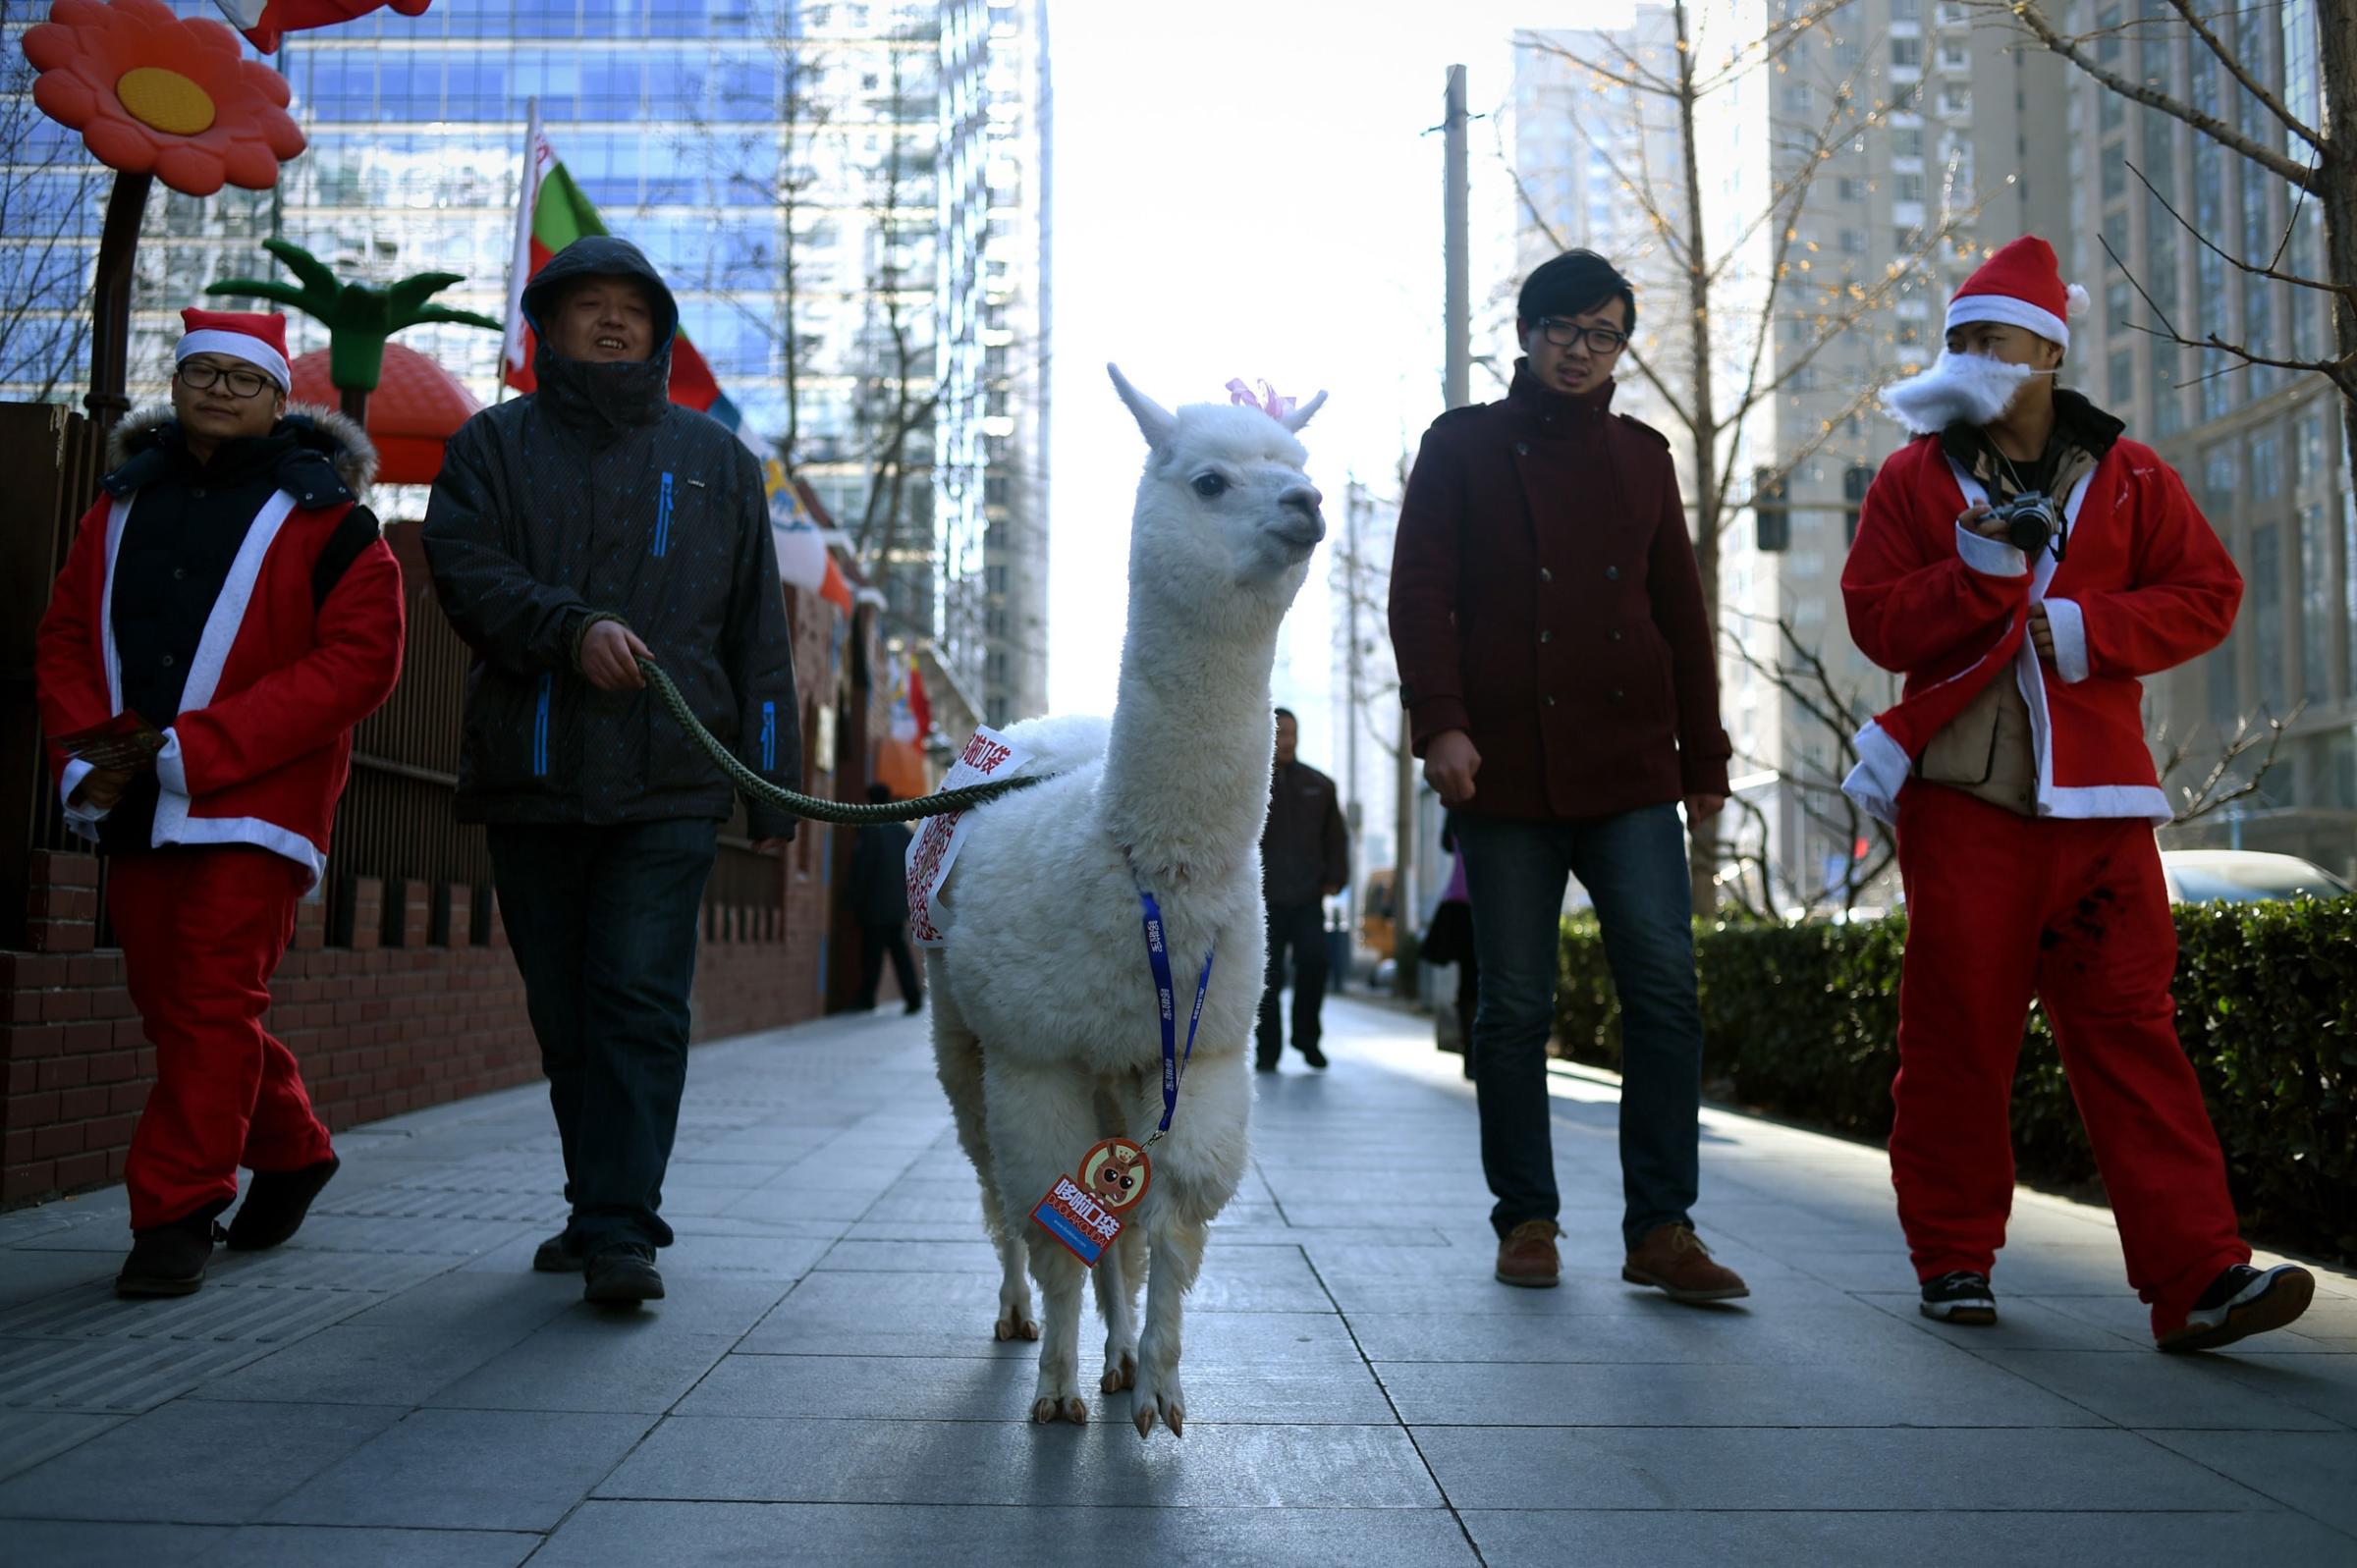 A group of salesmen walk along a street with an alpaca used for product promotion in Beijing on Dec. 25, 2014. Christmas -- once banned in China -- has exploded in the atheist nation in recent years, with marketers using everything from saxophones and smurfs to steam trains to get shoppers to open their wallets.